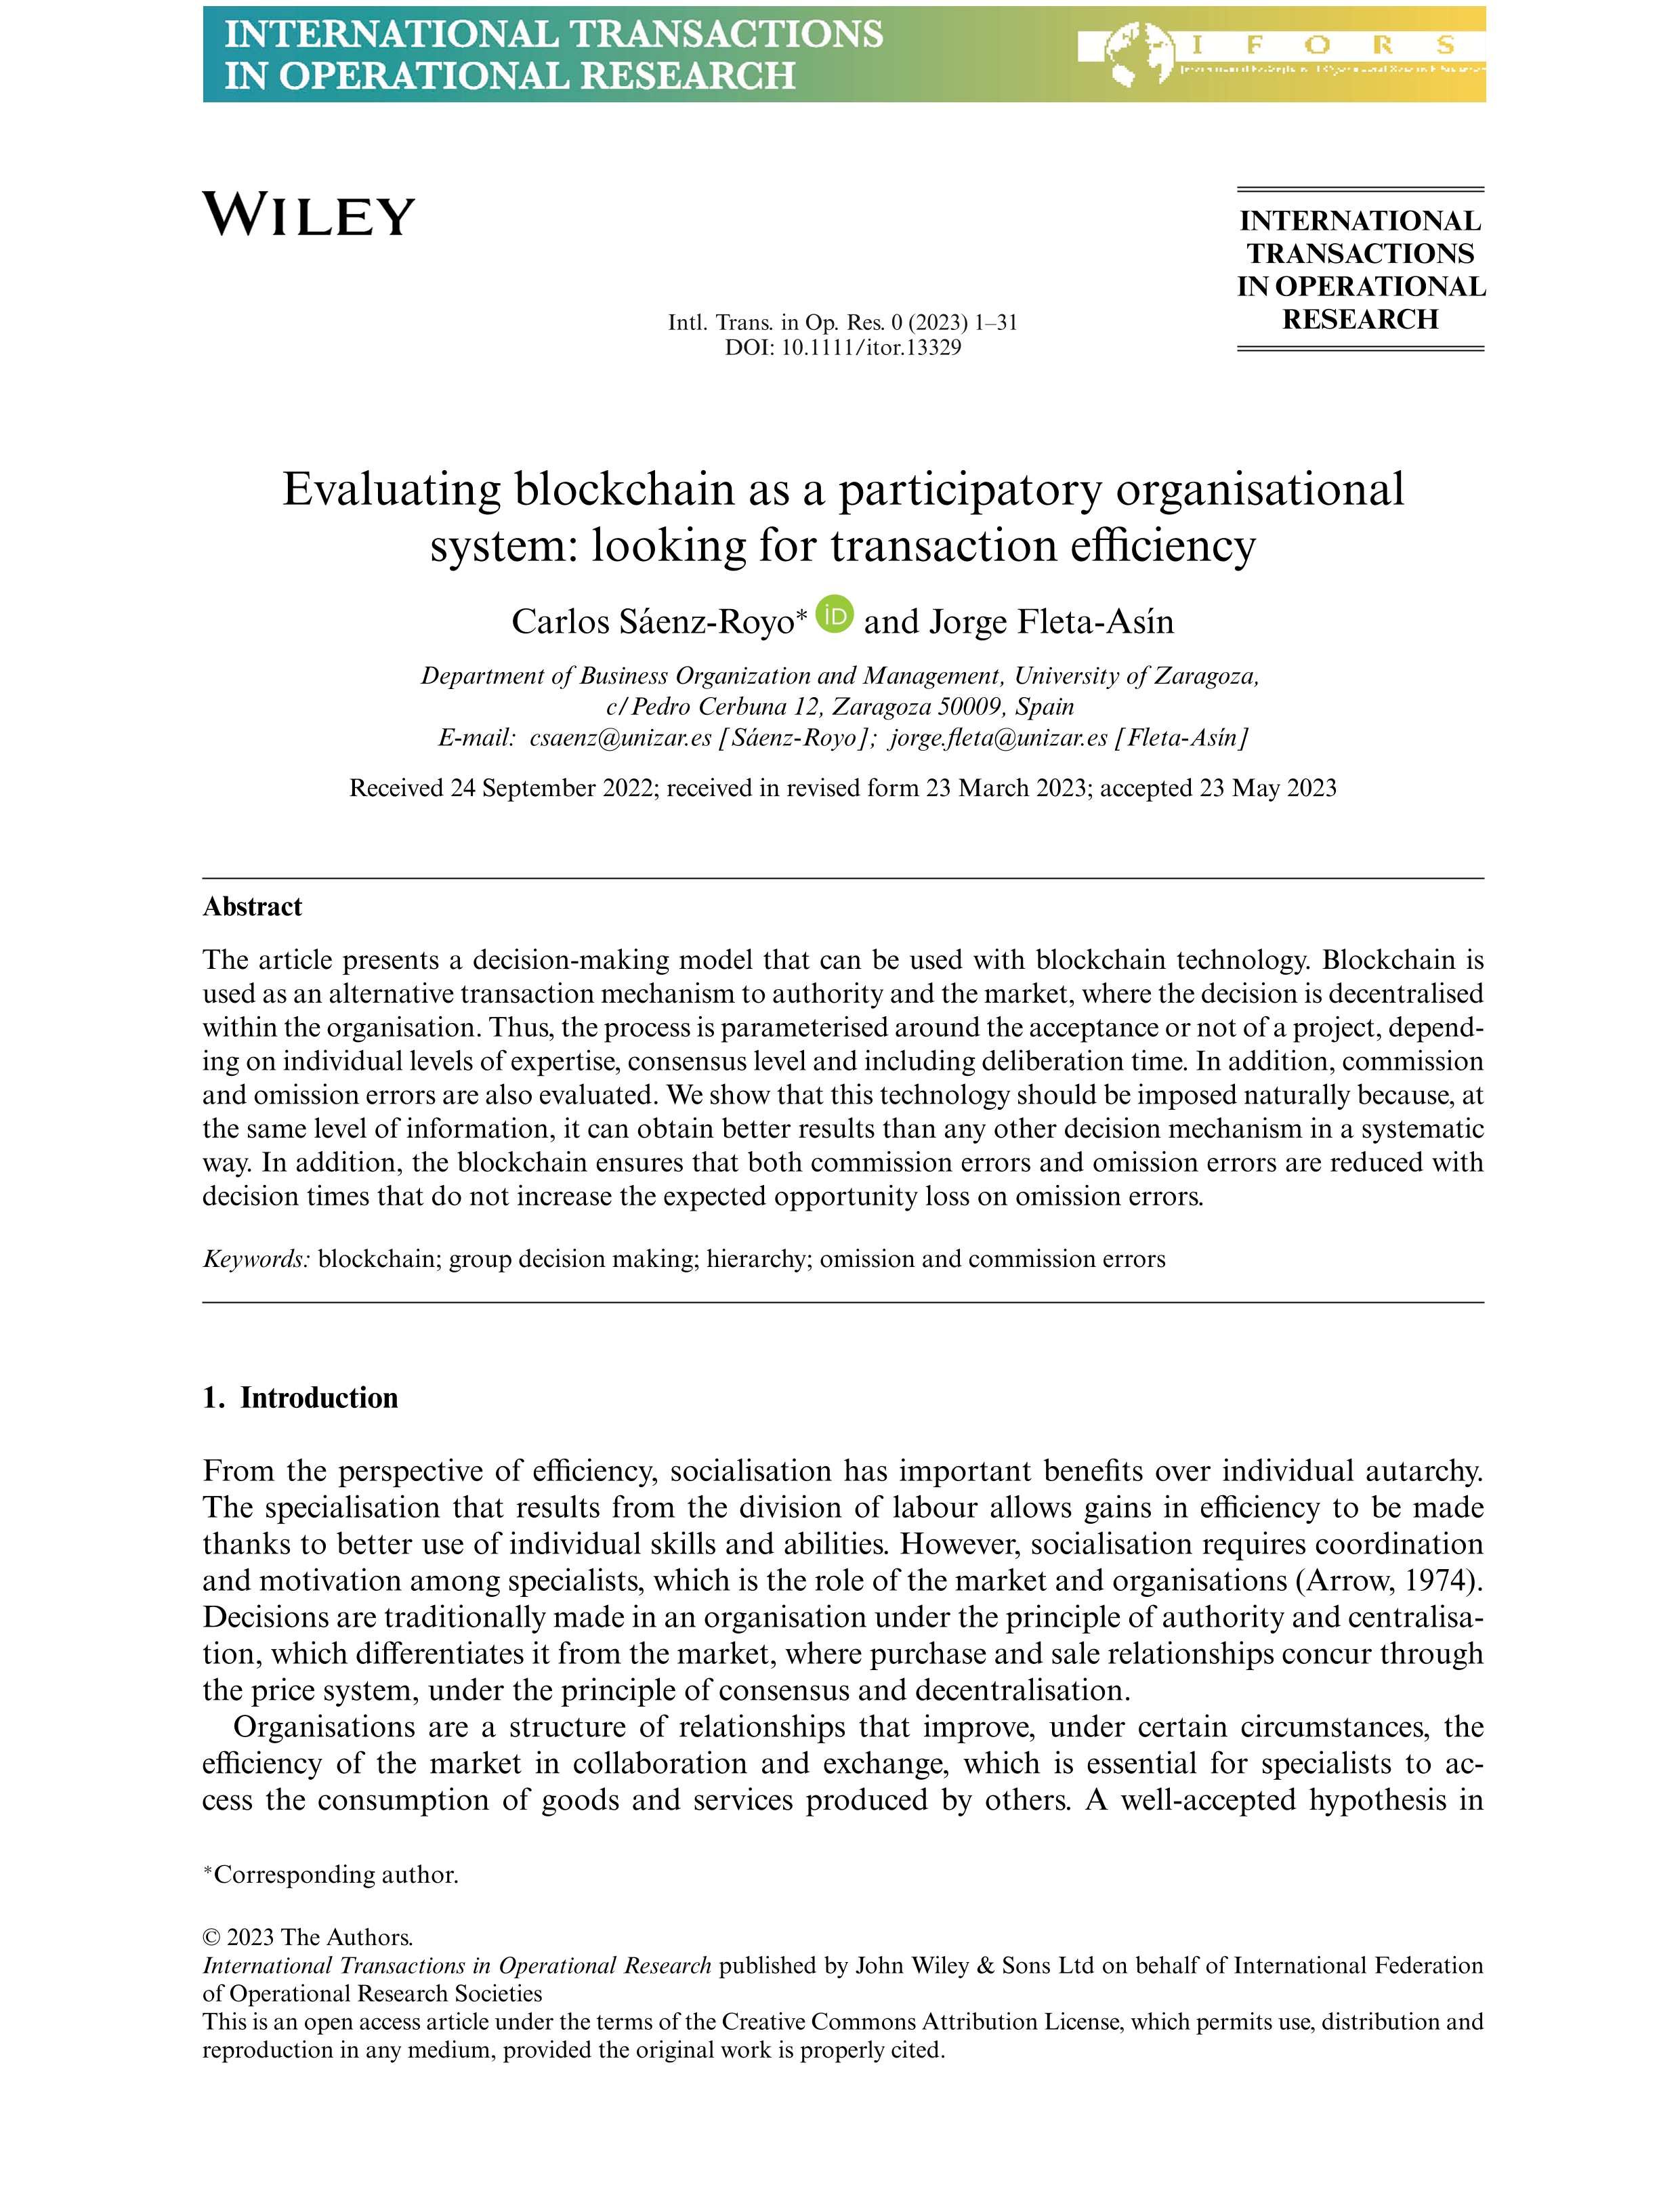 Evaluating blockchain as a participatory organisational system: looking for transaction efficiency